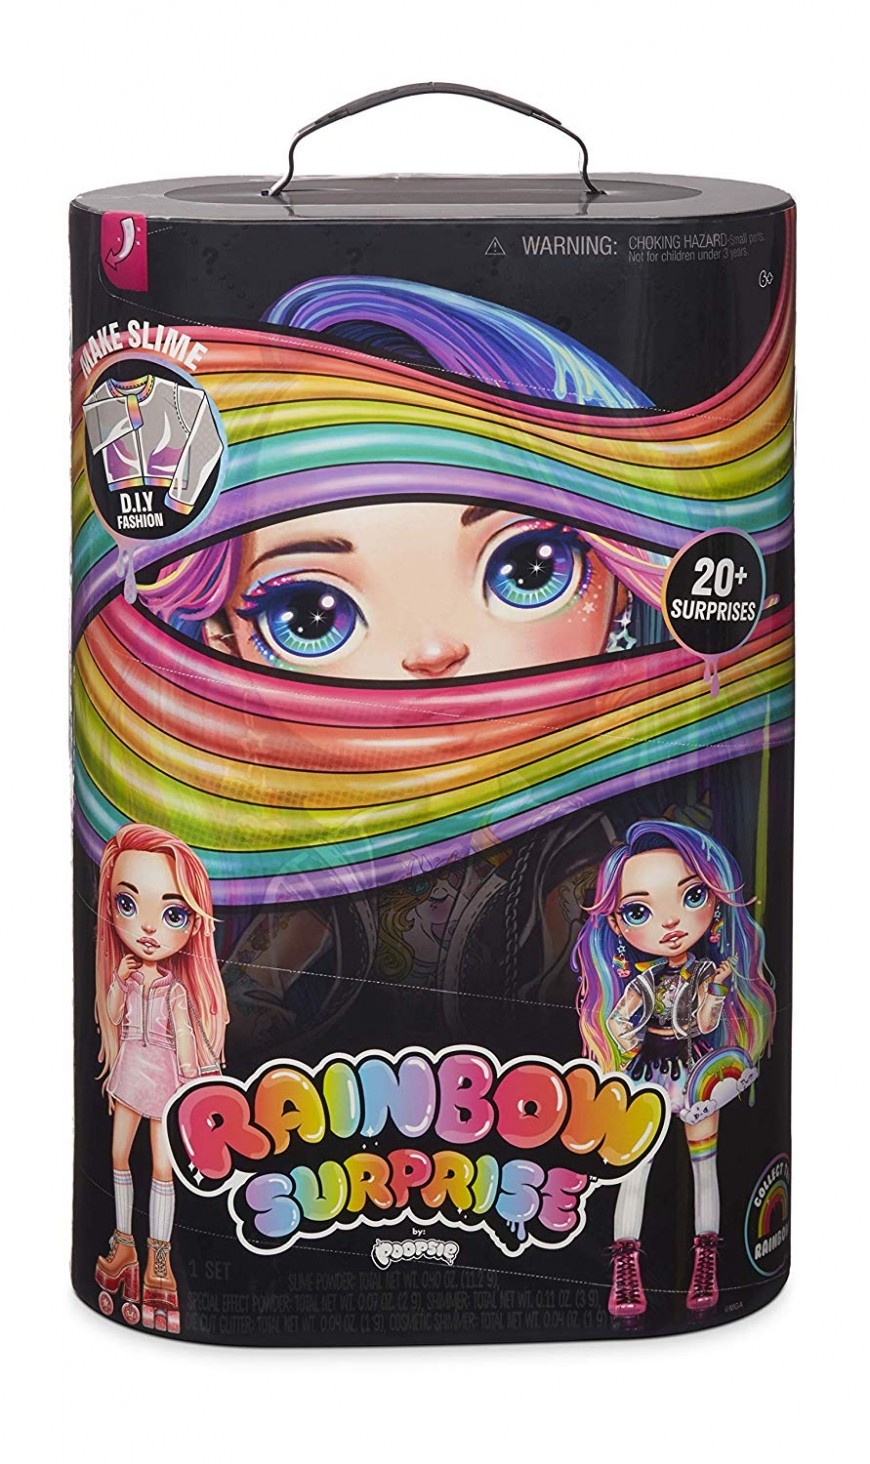 You can get Poopsie Rainbow Surprises Rainbow or Pink doll here